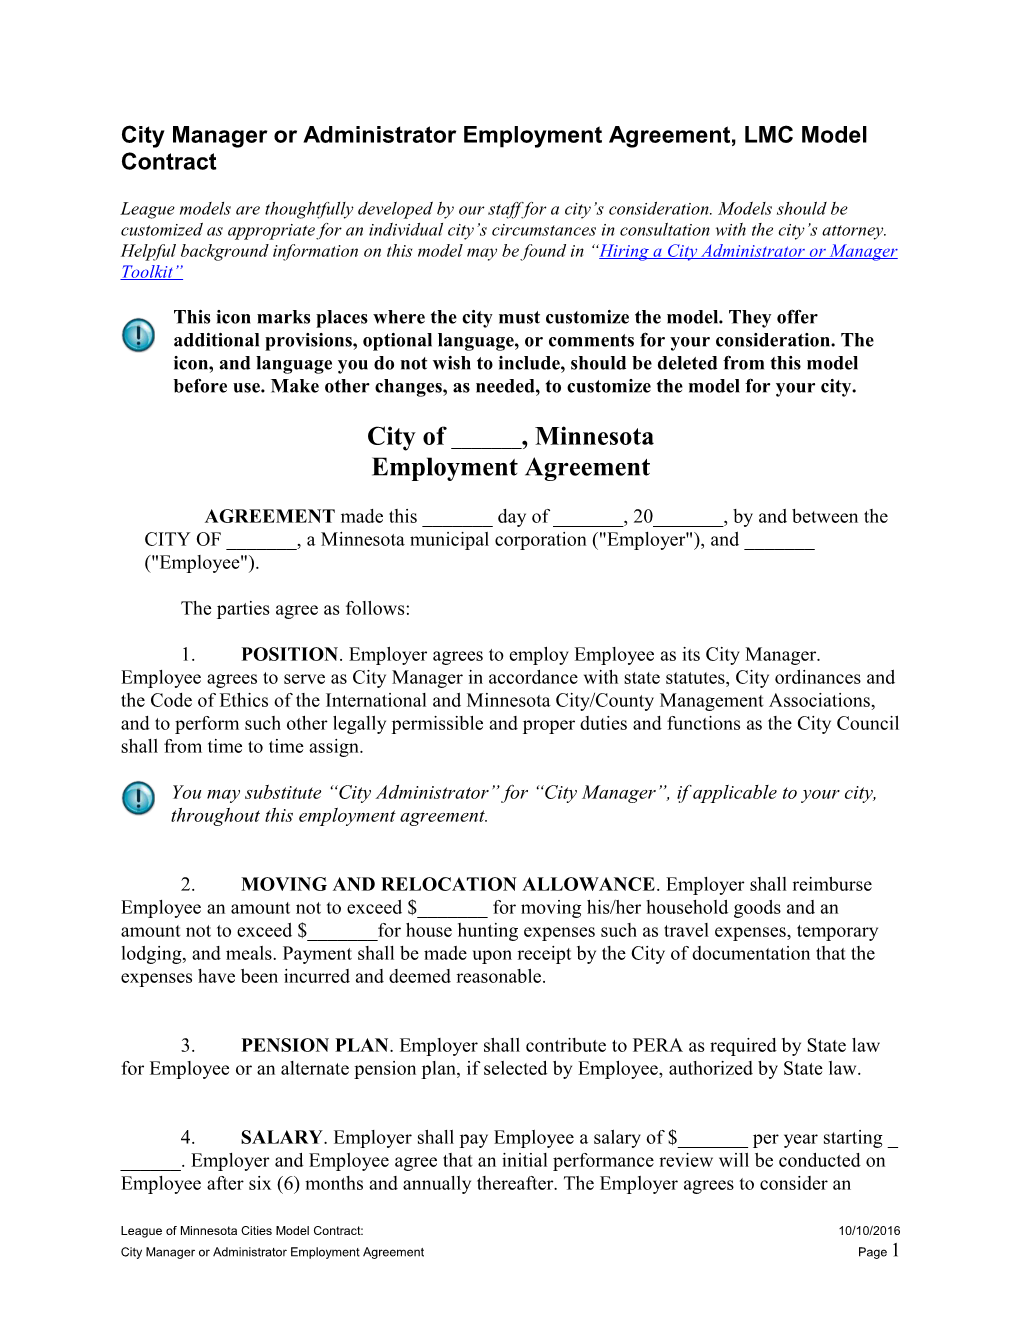 City Manager Or Administrator Employment Agreement